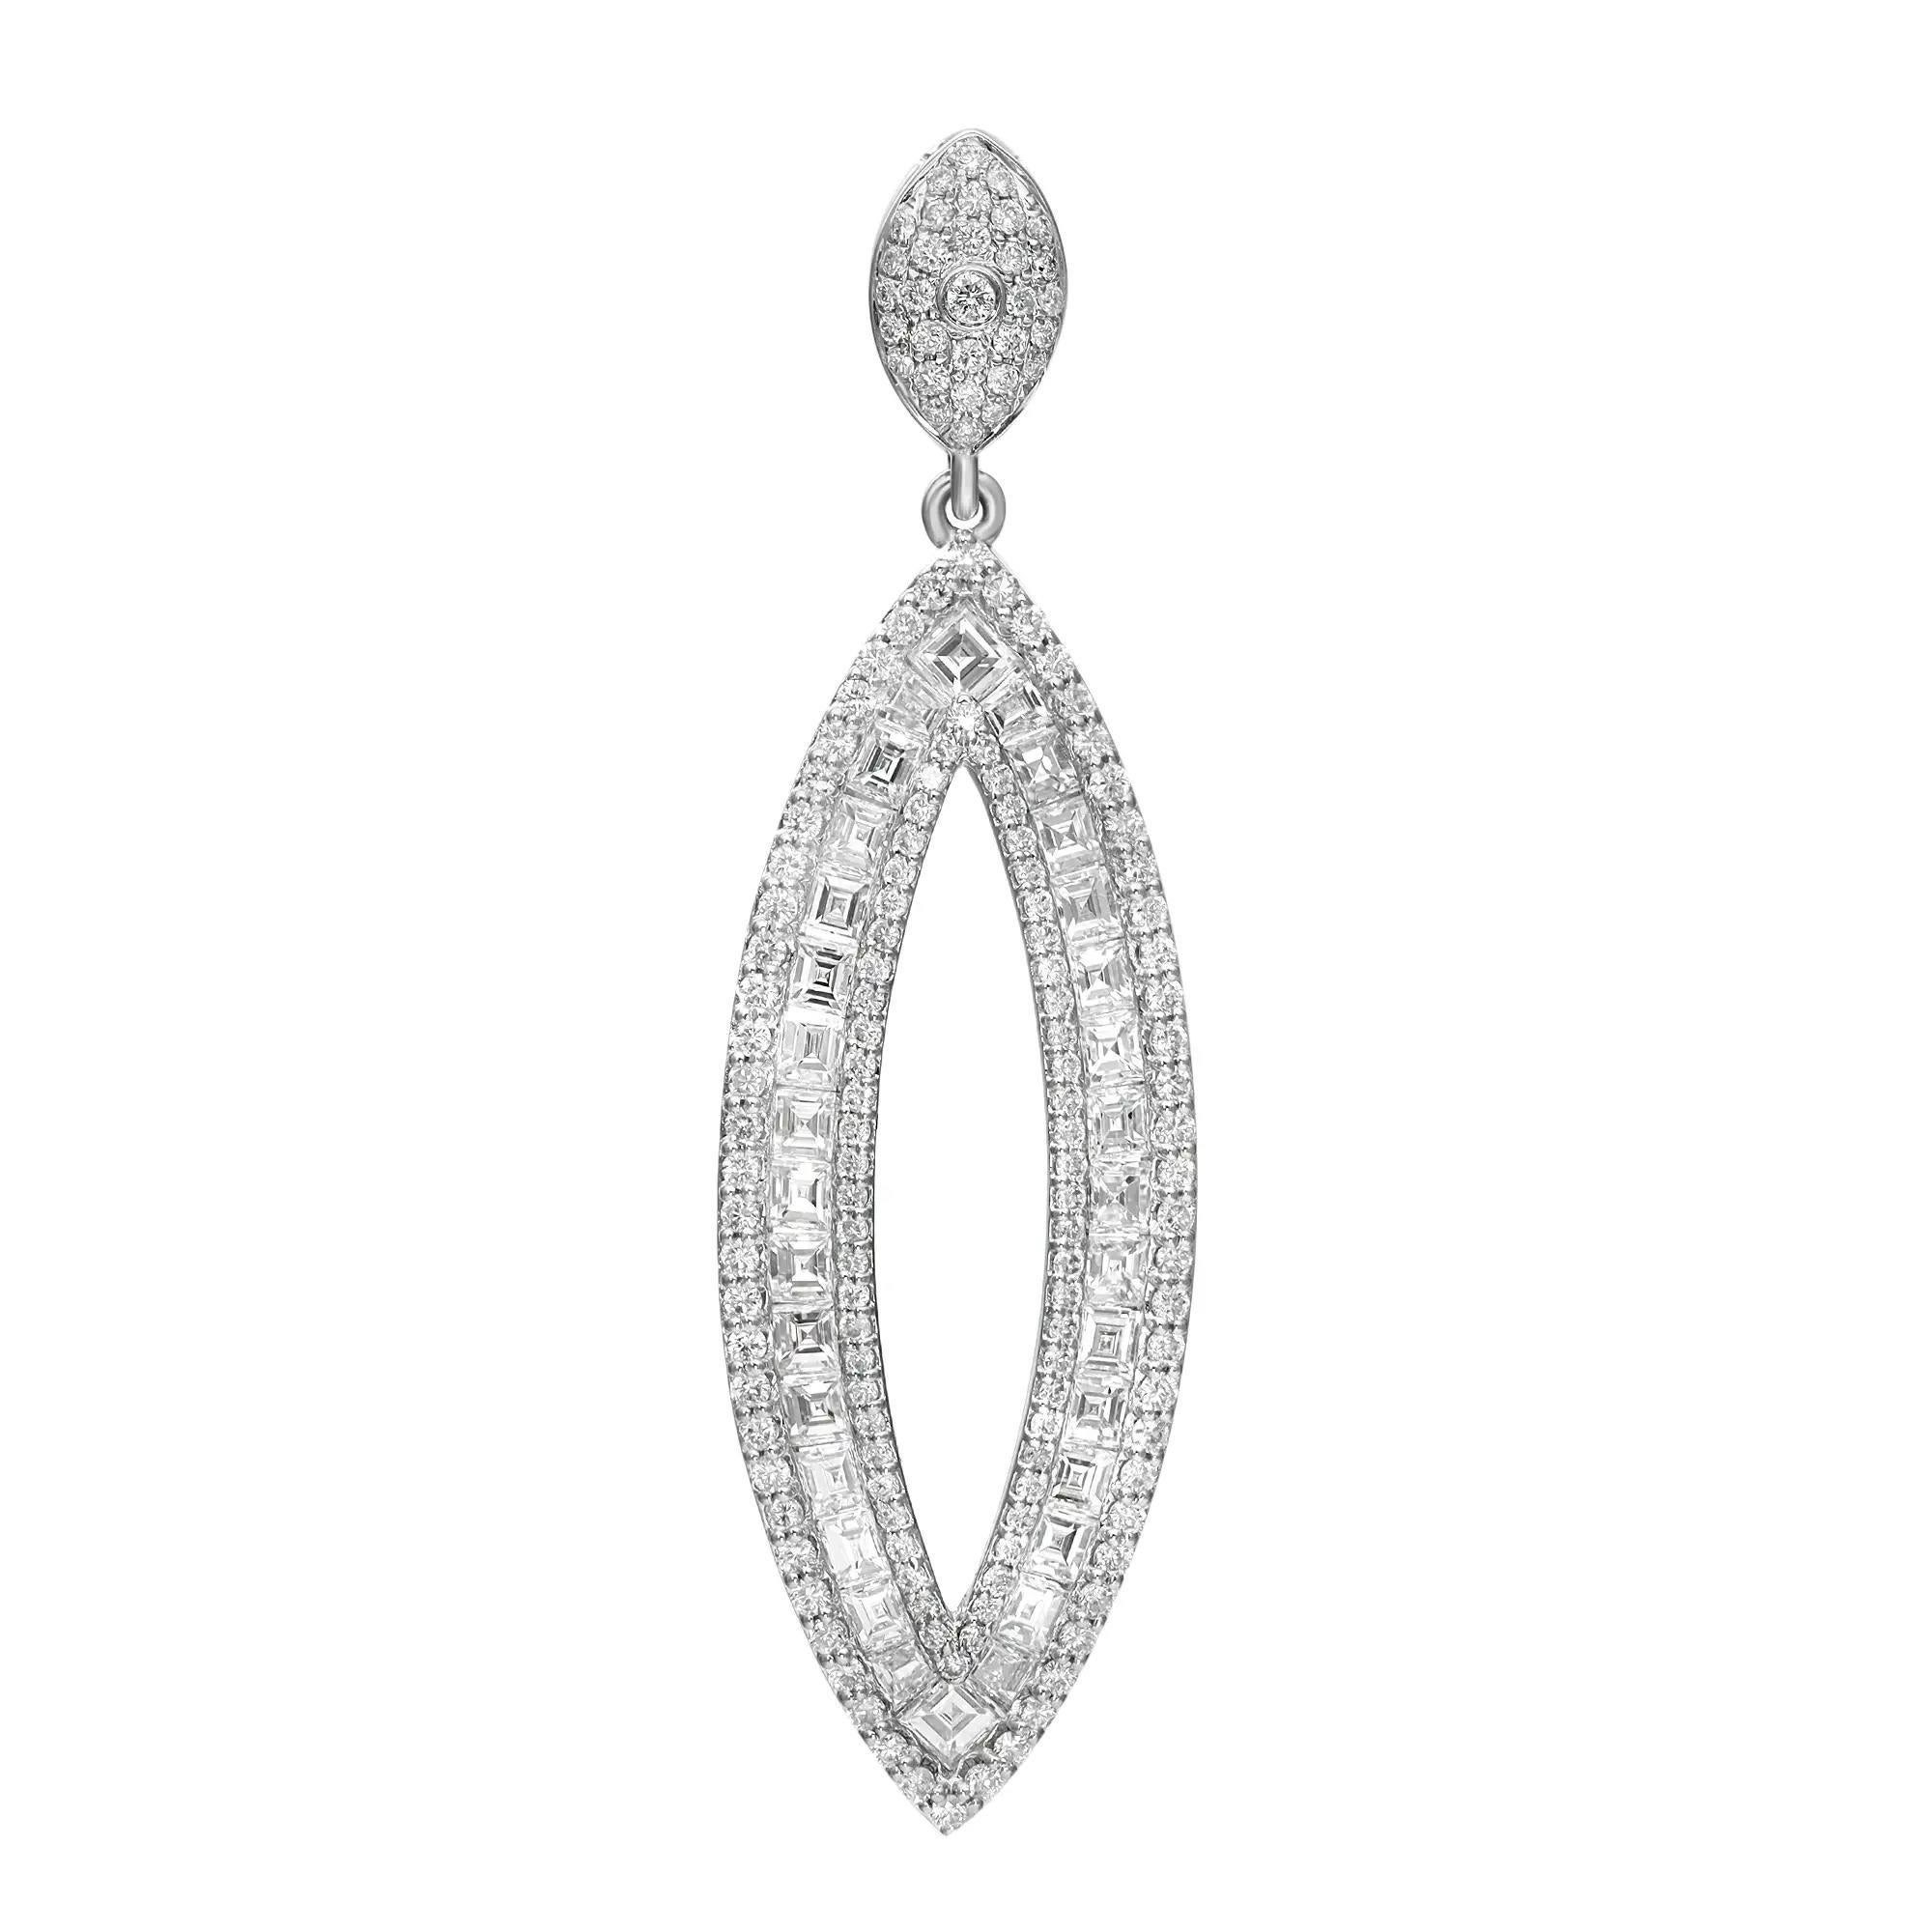 Exquisite 18K white gold 5.32 carats diamond drop earrings featuring channel set princess cut and prong set round brilliant cut diamonds that dangle from an eye-catching pave set diamond push-back post. Each diamond in this luxurious pair of earring